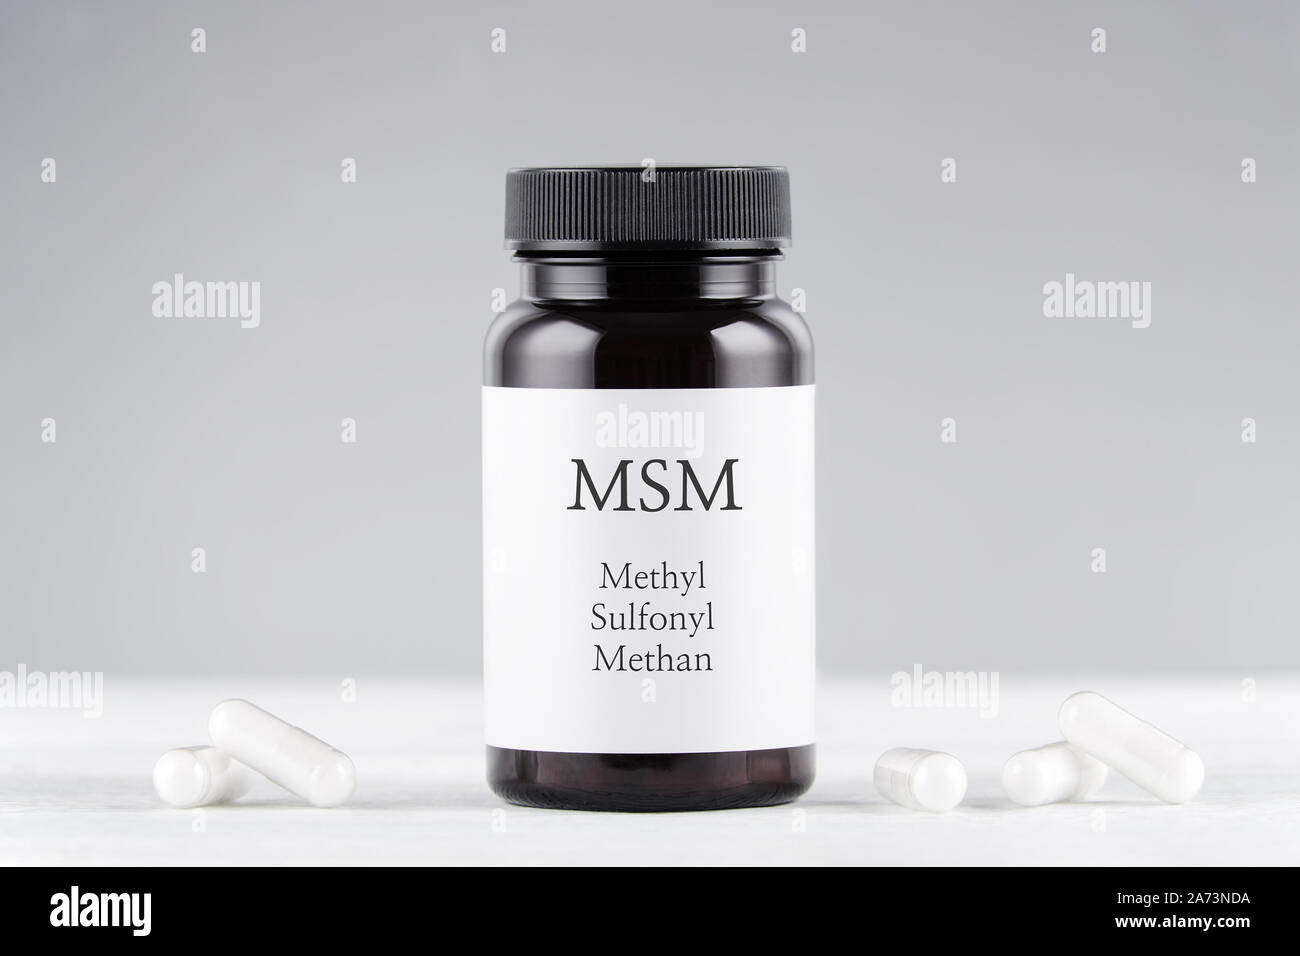 nutritional supplement msm, sulfur, methylsulfonylmethan bottle and capsules on gray Stock Photo